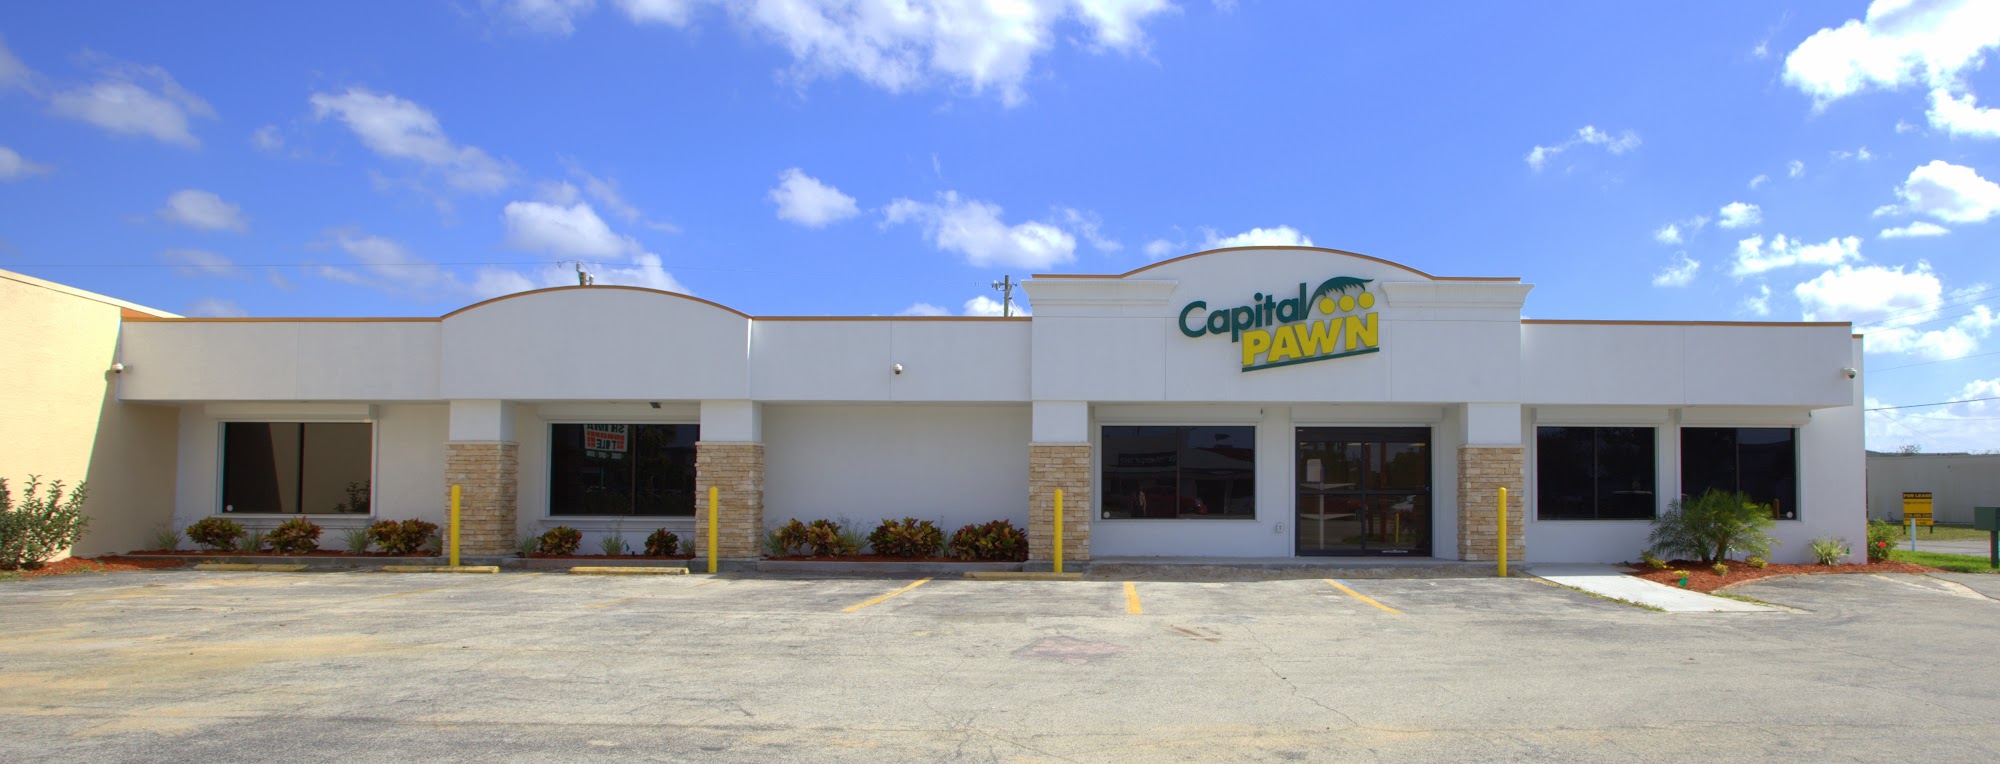 Capital Pawn - Cape Coral